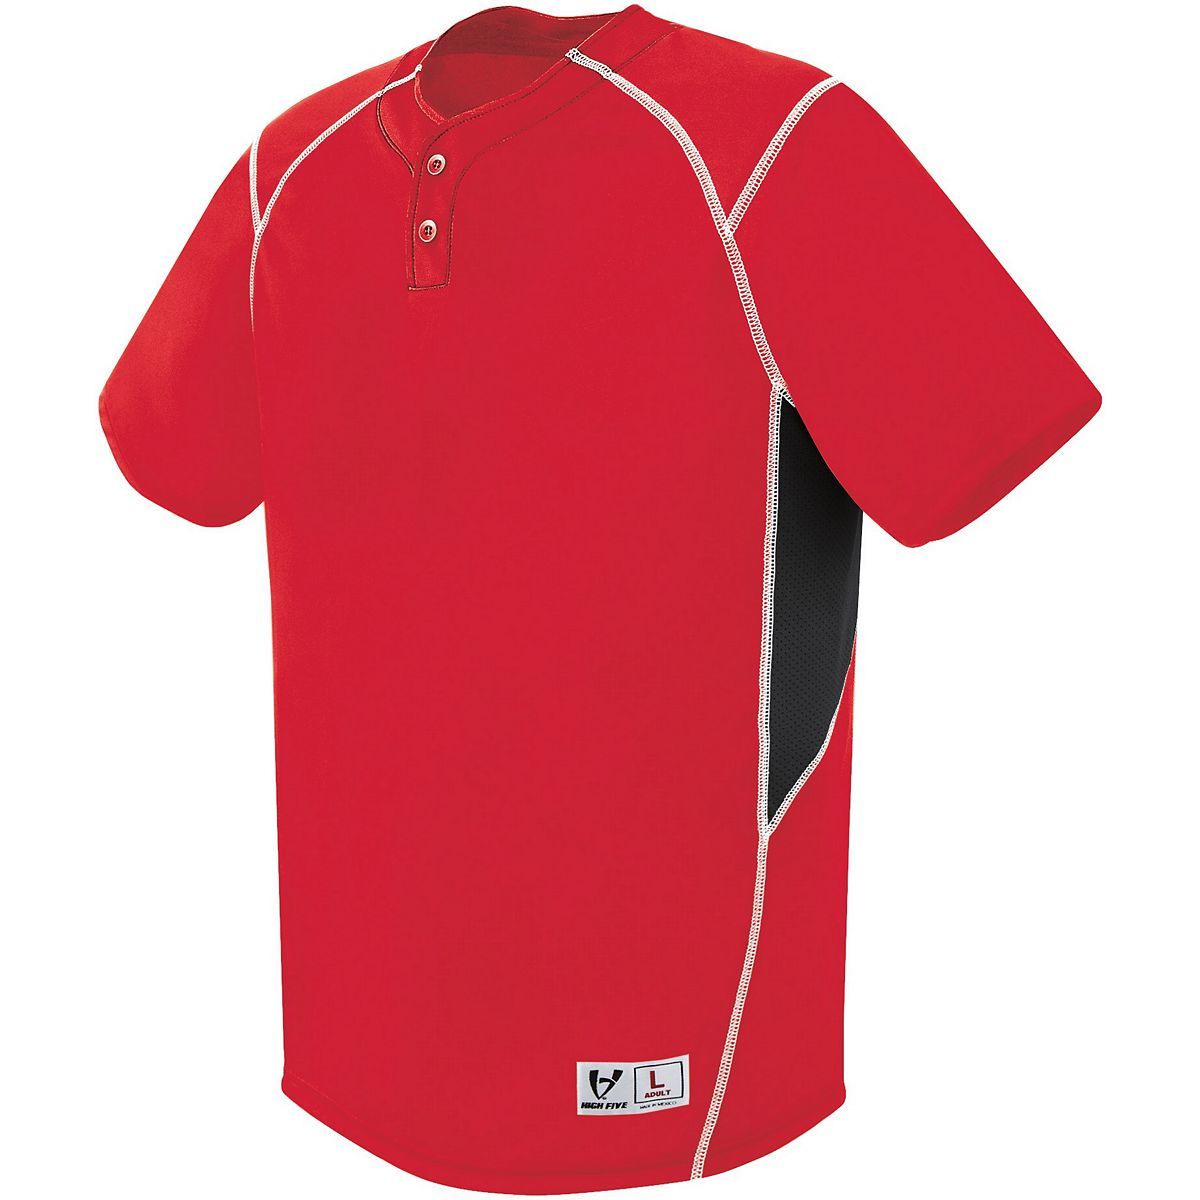 Augusta Sportswear Bandit Two-Button Jersey in Scarlet/Black/White  -Part of the Adult, Adult-Jersey, Augusta-Products, Baseball, Shirts, All-Sports, All-Sports-1 product lines at KanaleyCreations.com